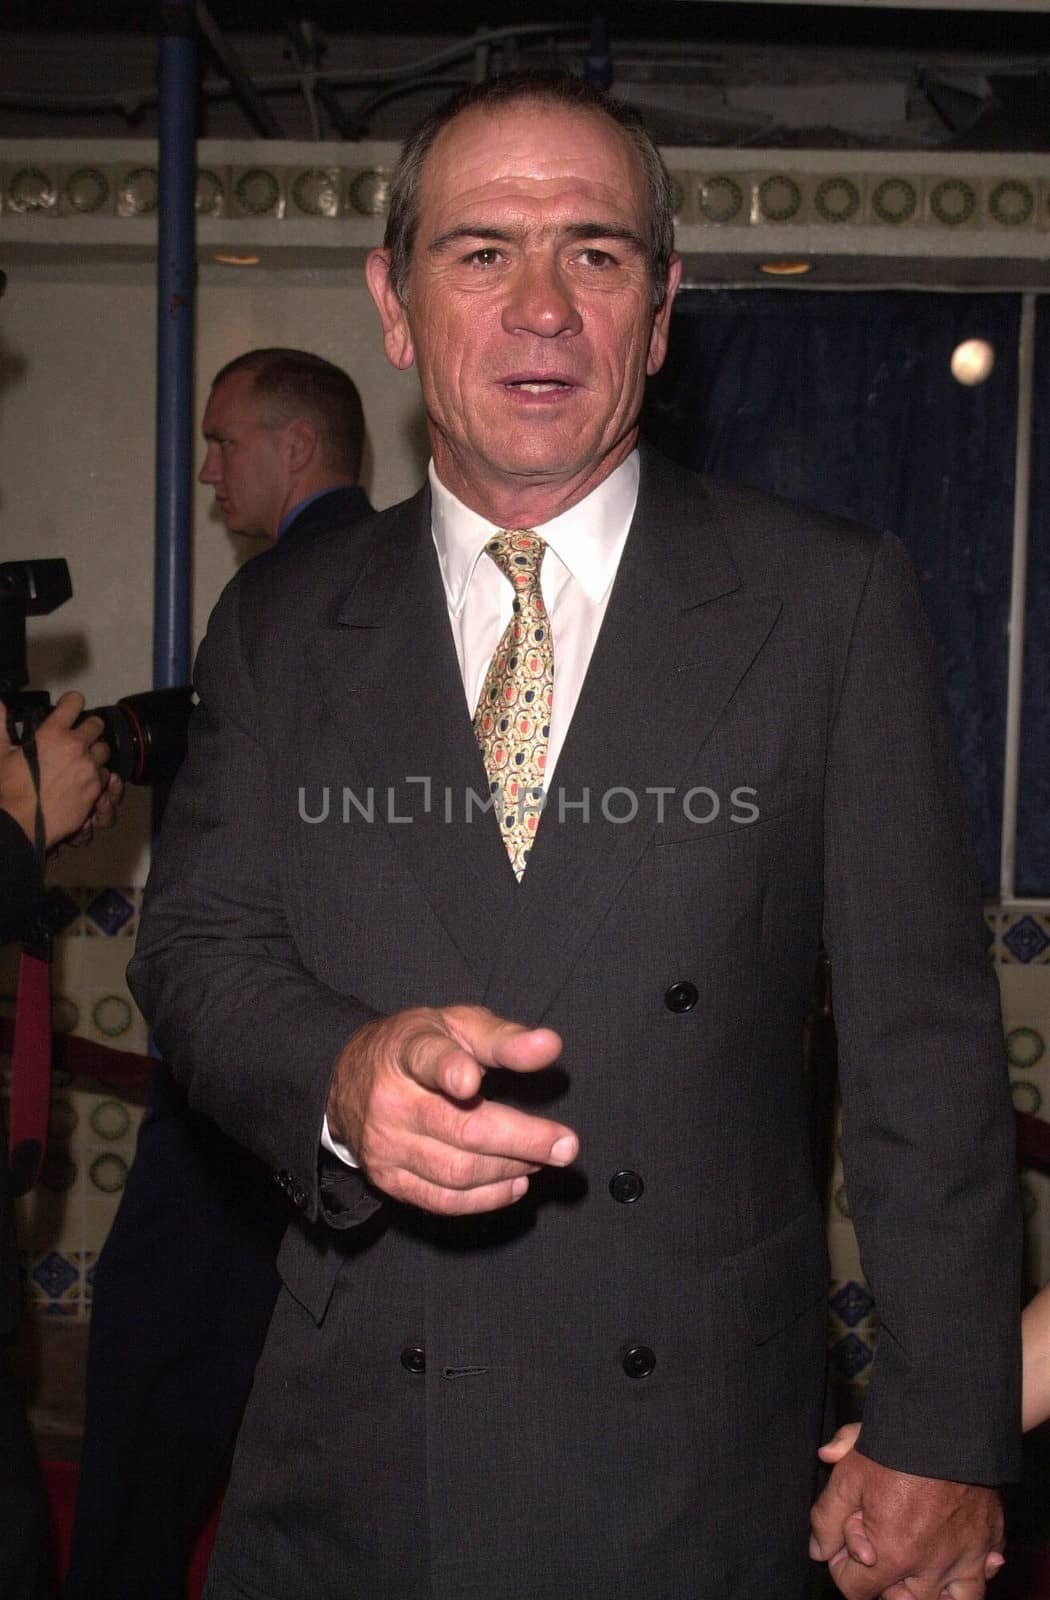 Tommy Lee Jones at the premiere of "Space Cowboys" in Westwood. 08-01-00